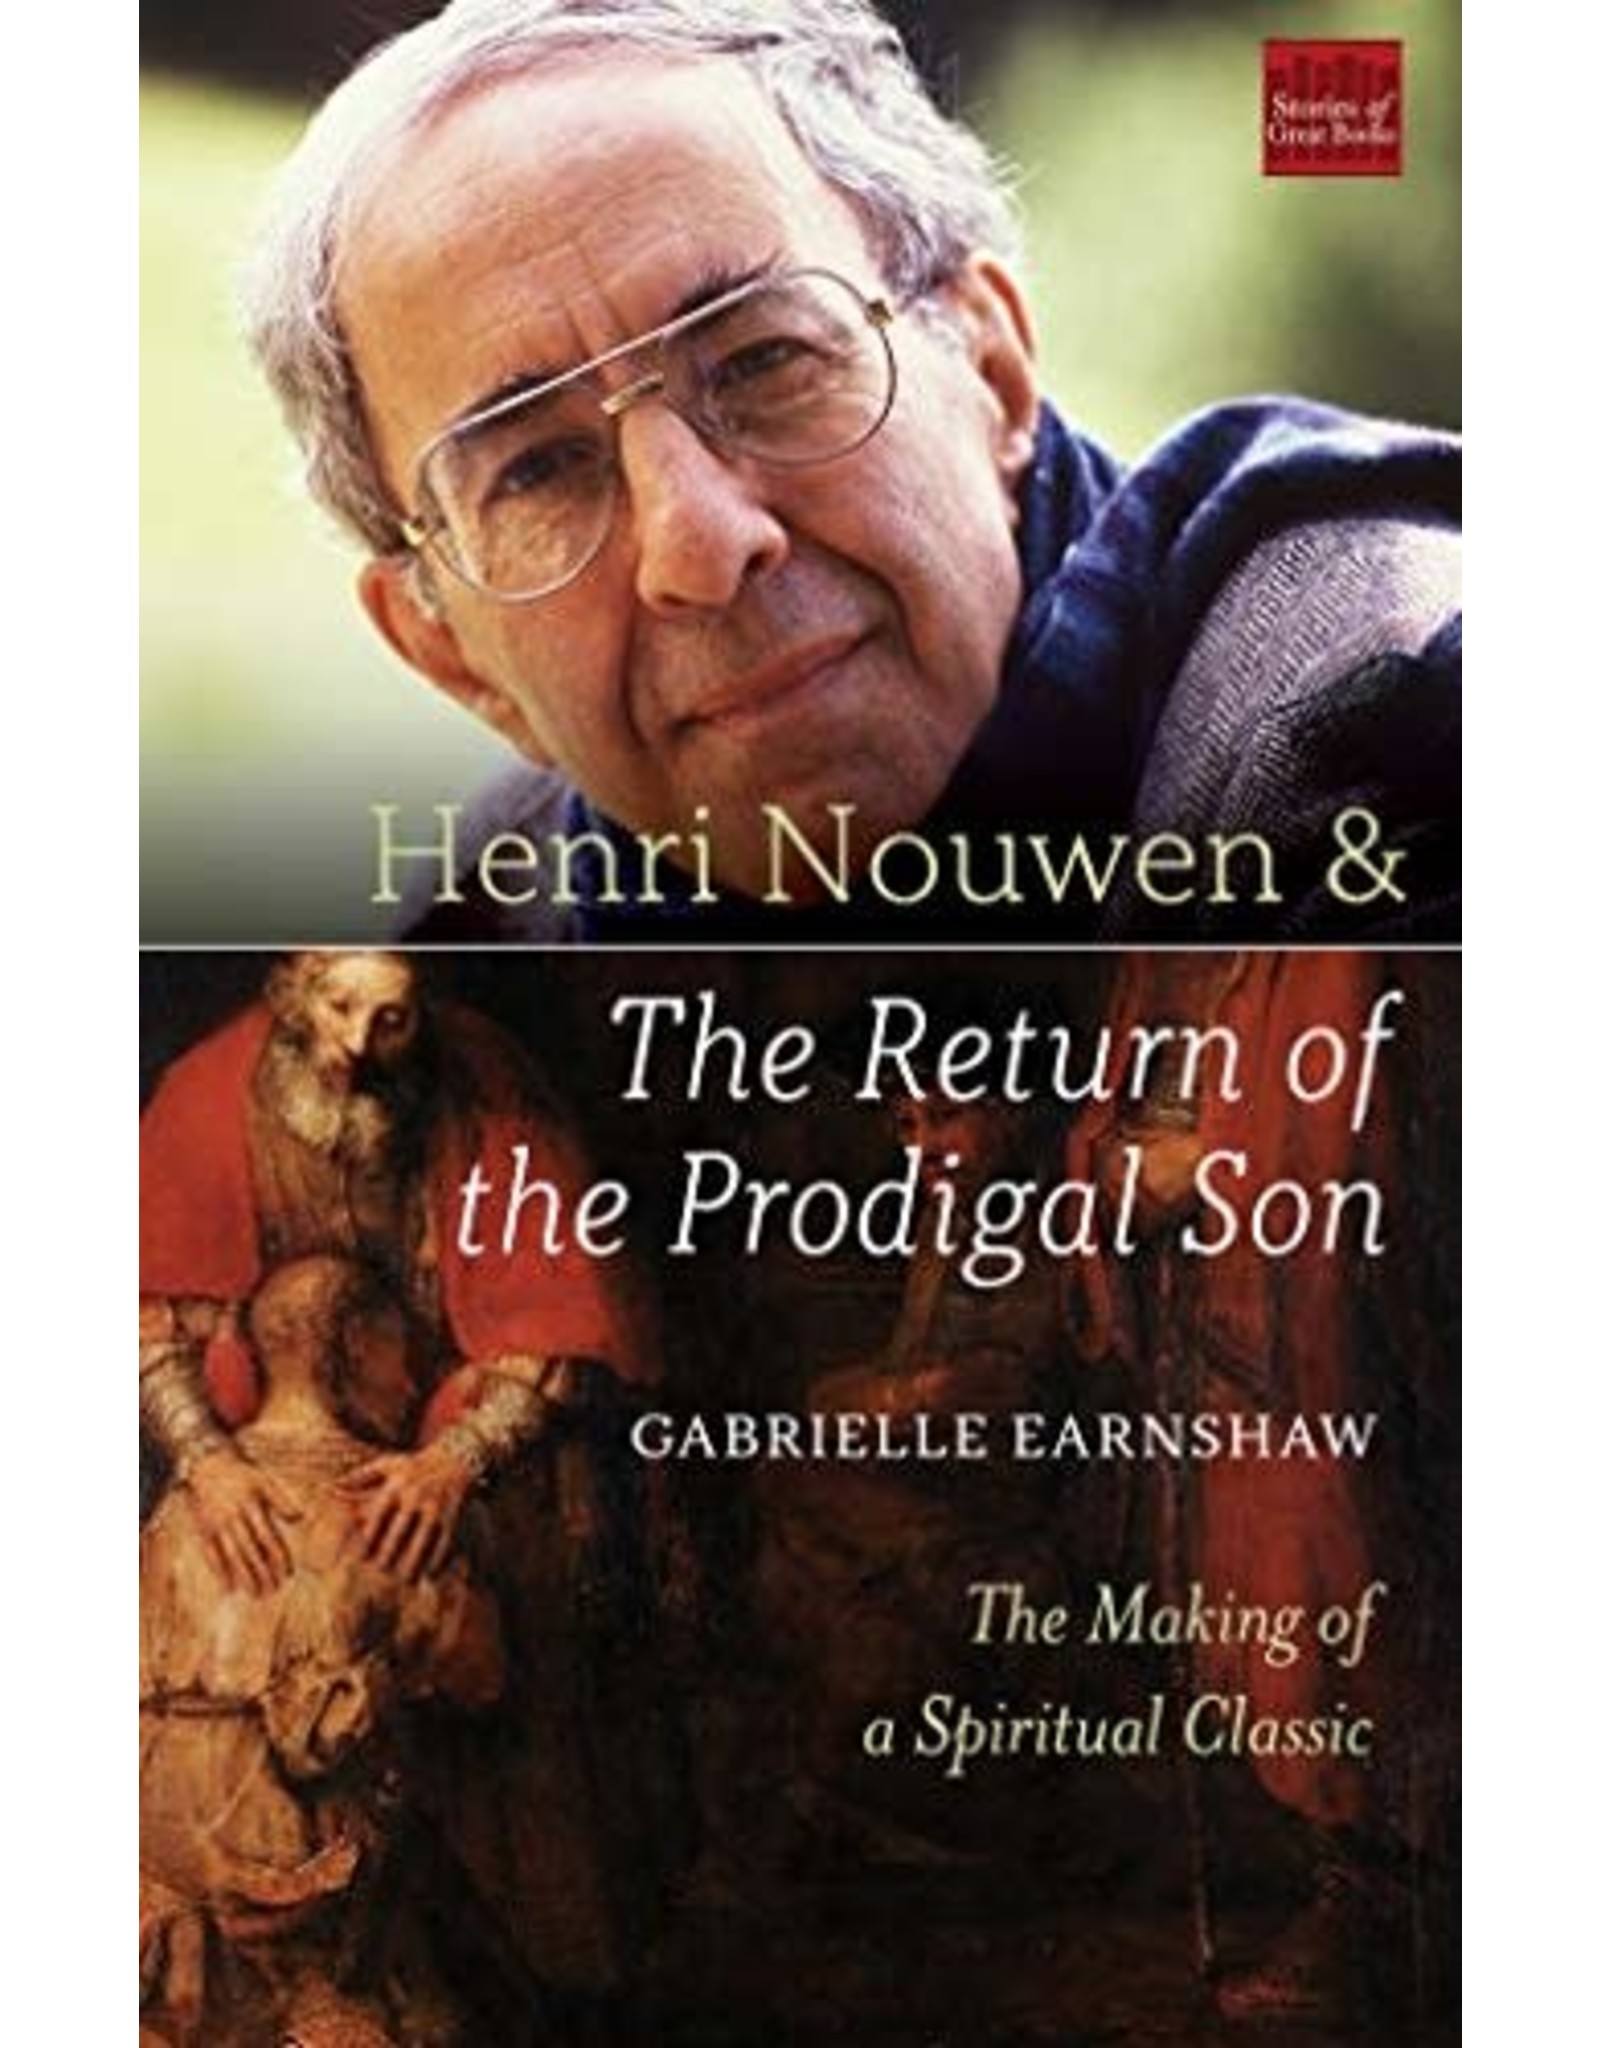 Paraclete Press Henri Nouwen & The Return of the Prodigal Son: The Making of a Spiritual Classic by Gabrielle Earnshaw (Paperback)